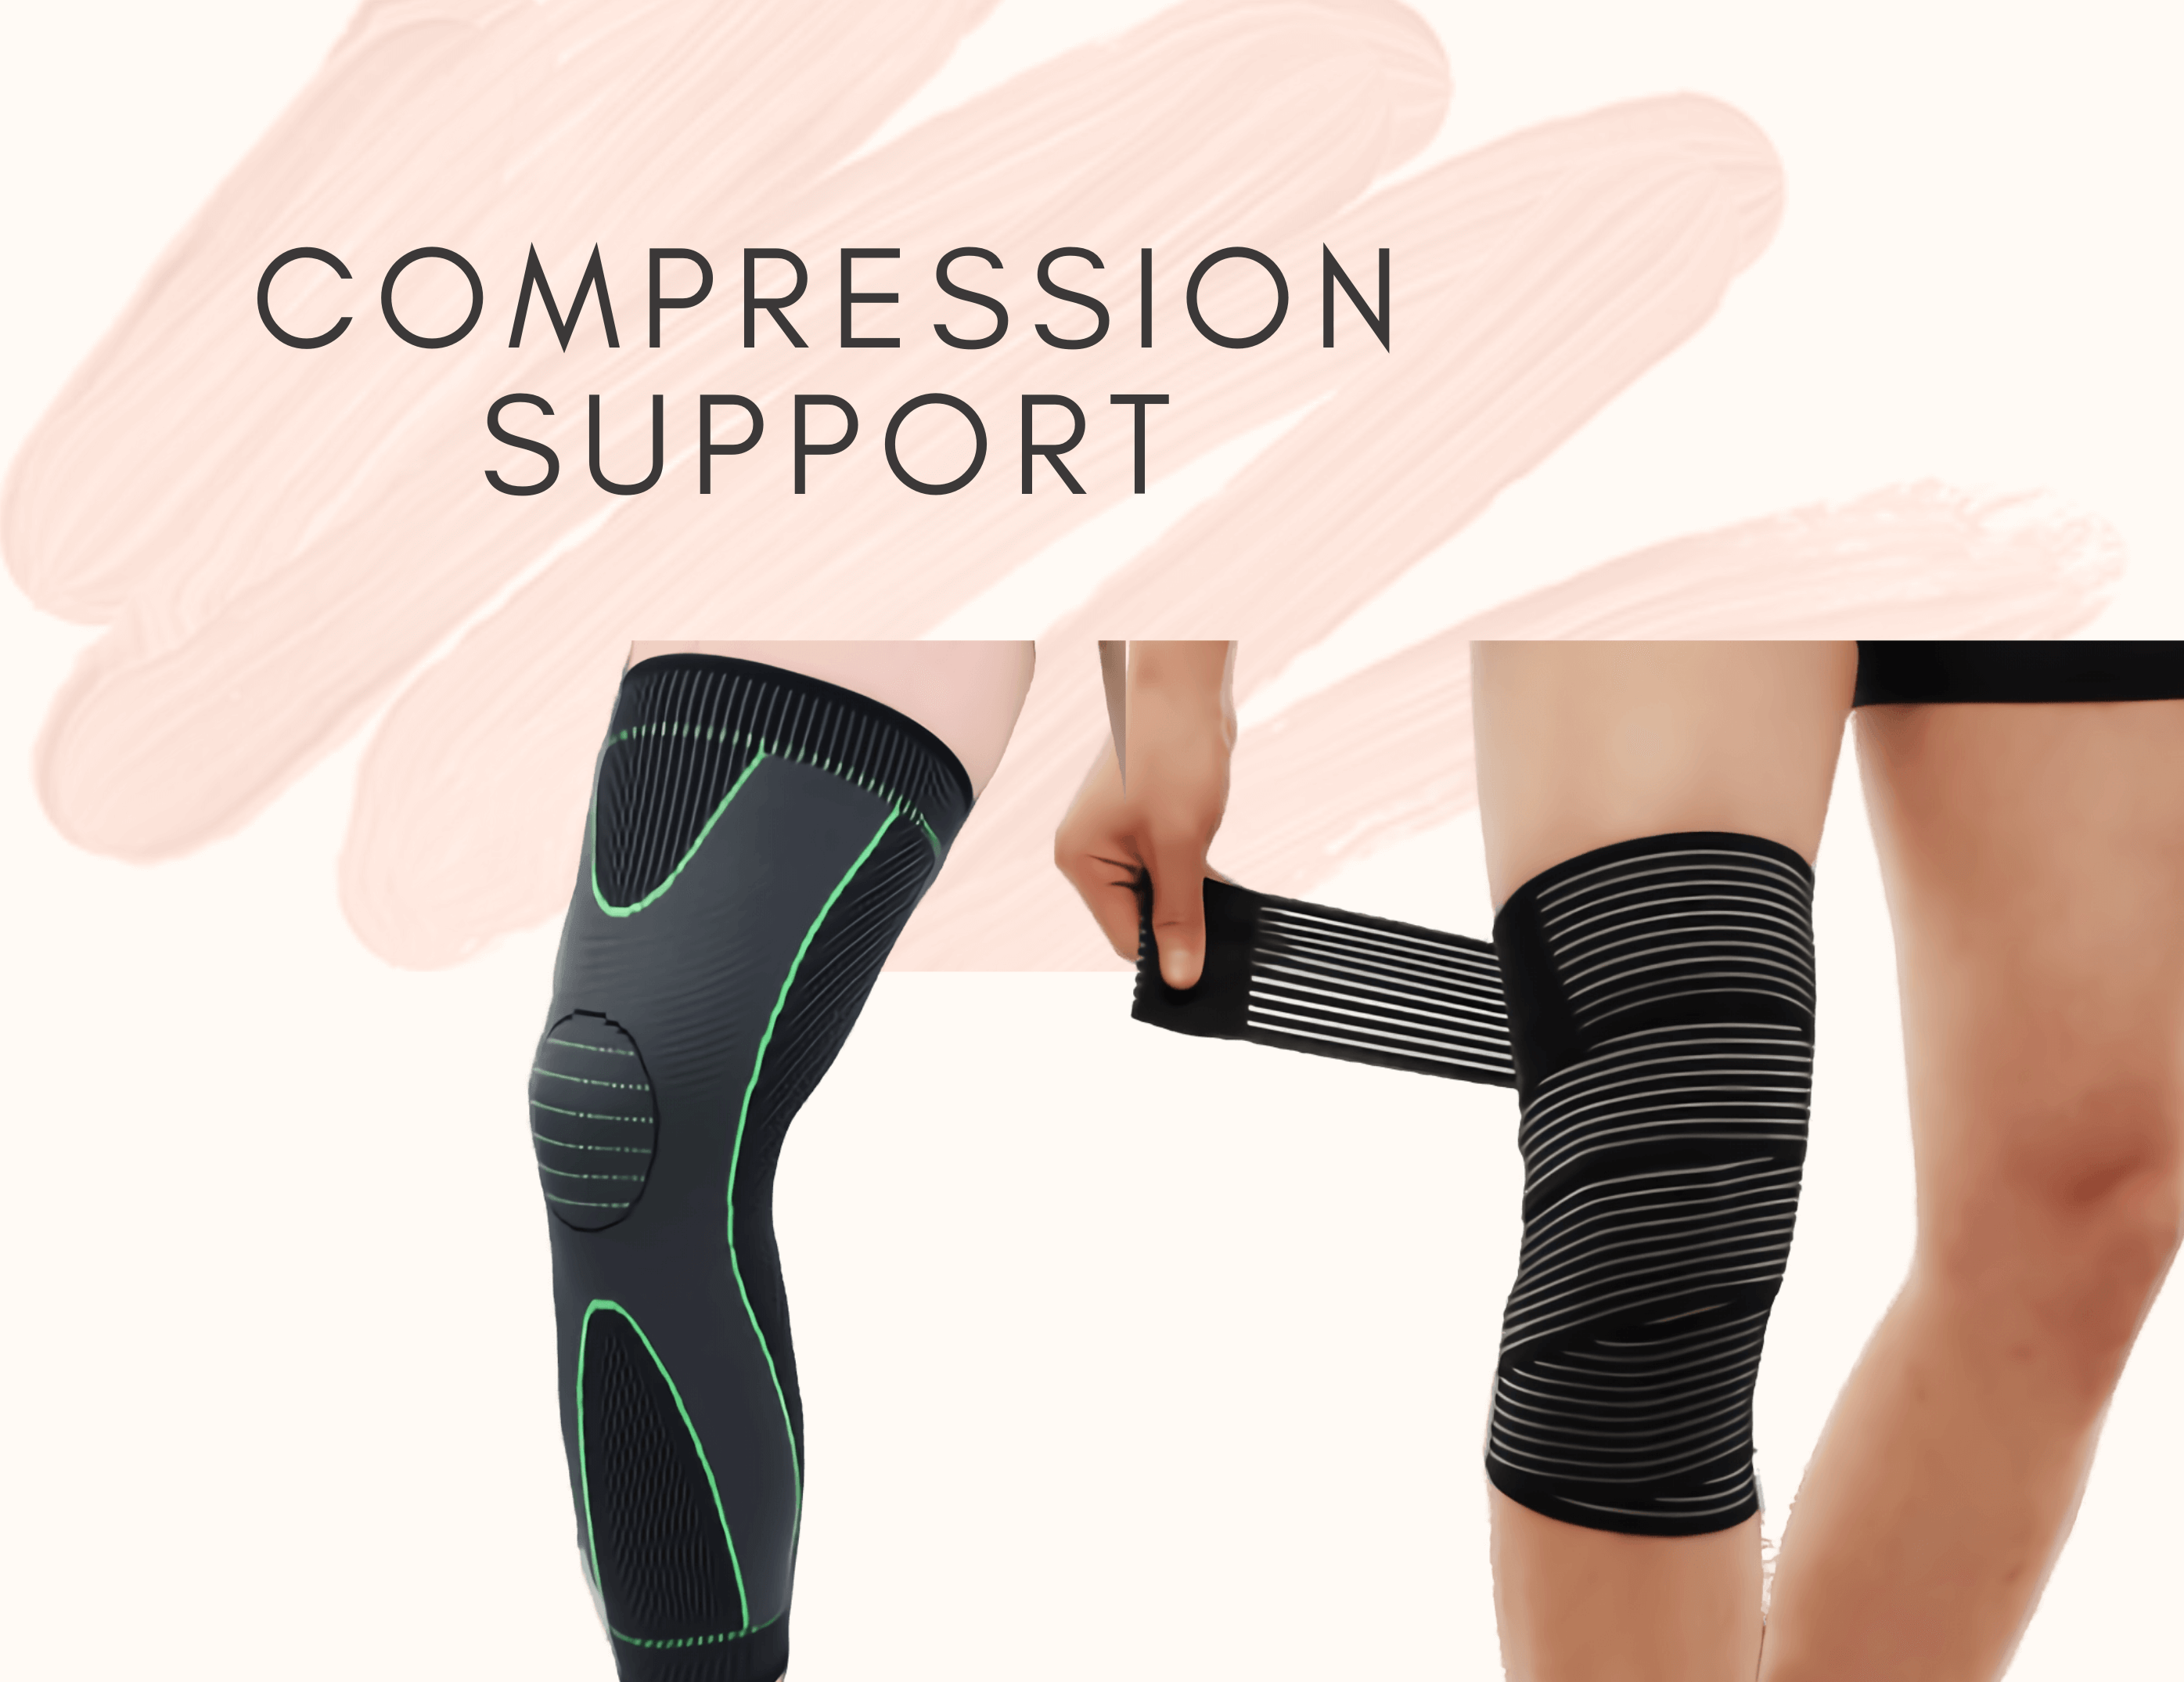 Compression support